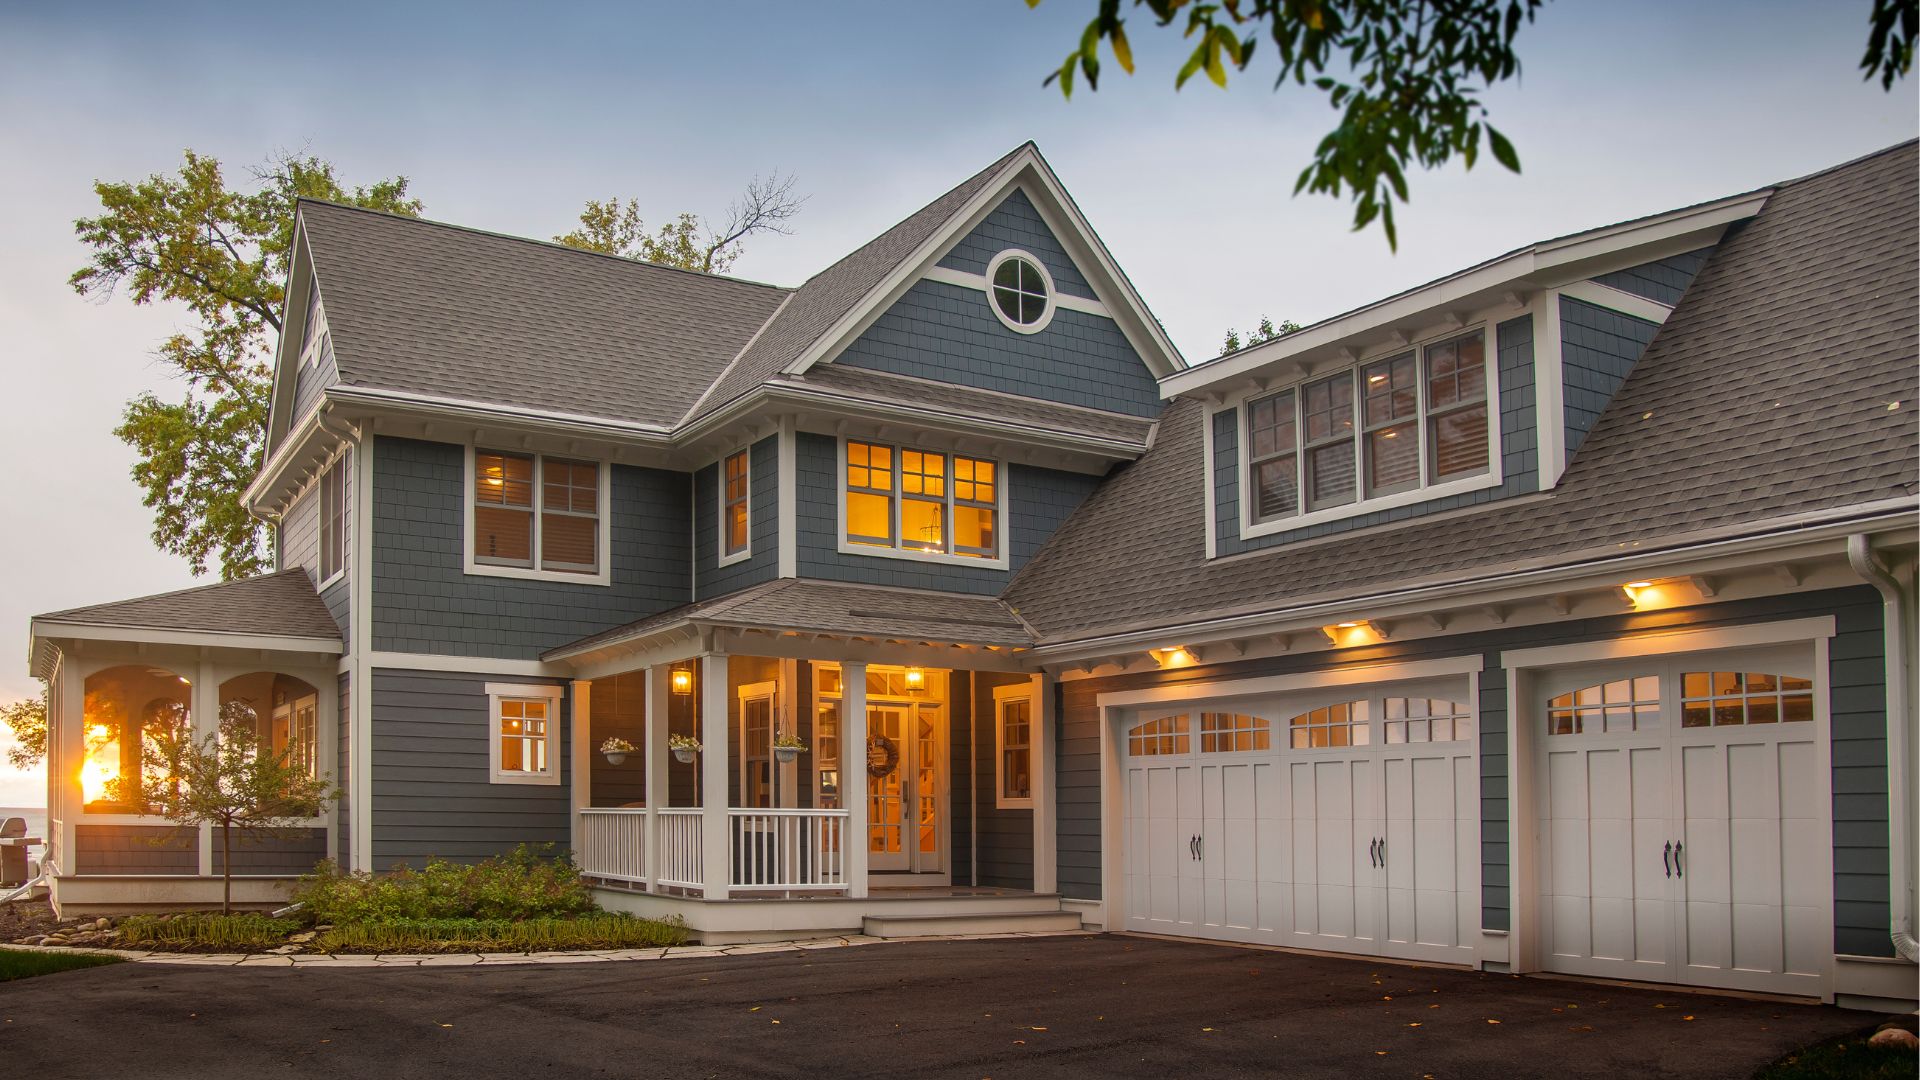 9 Factors That Affect the Price of James Hardie Siding